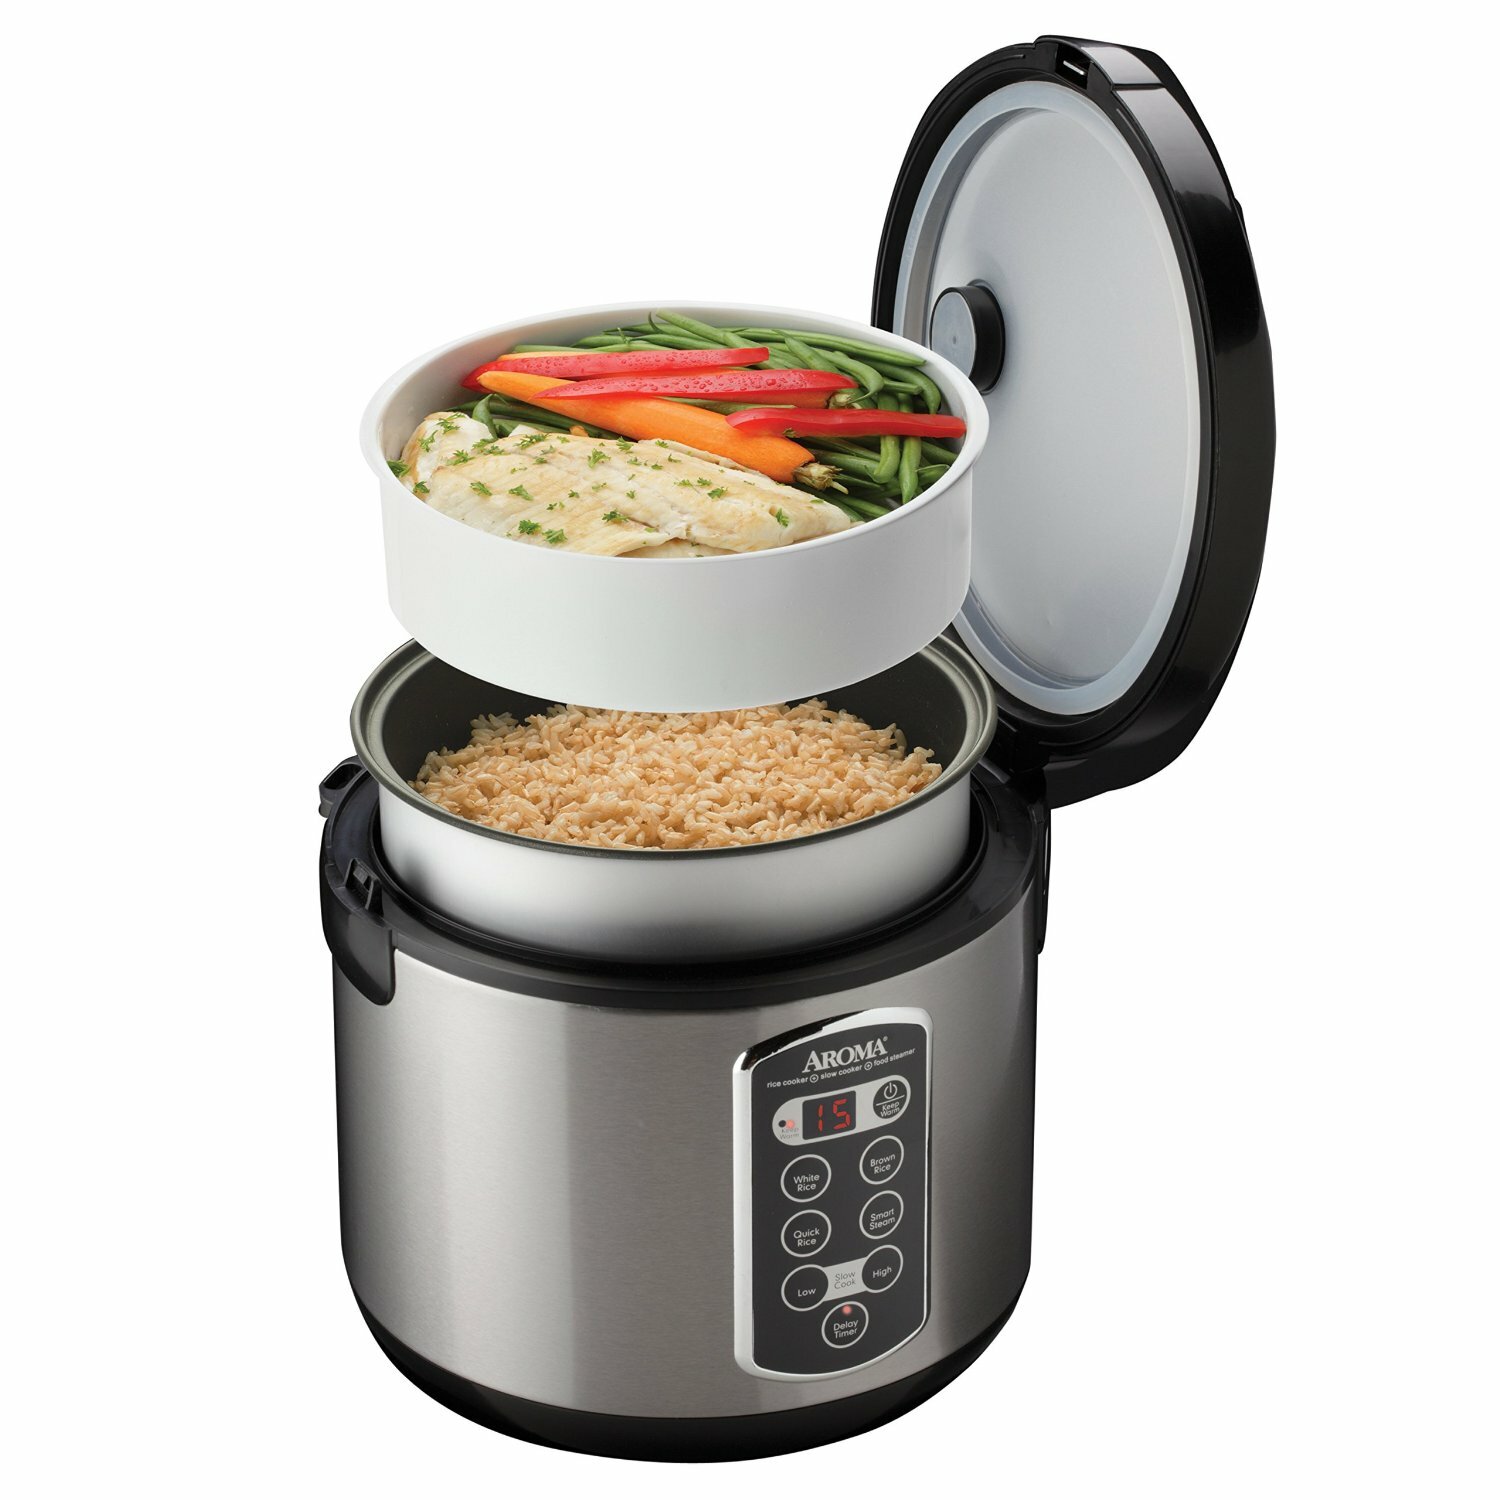 Aroma 20 Cup Stainless Steel Rice Cooker & Reviews | Wayfair Stainless Steel Aroma Rice Cooker